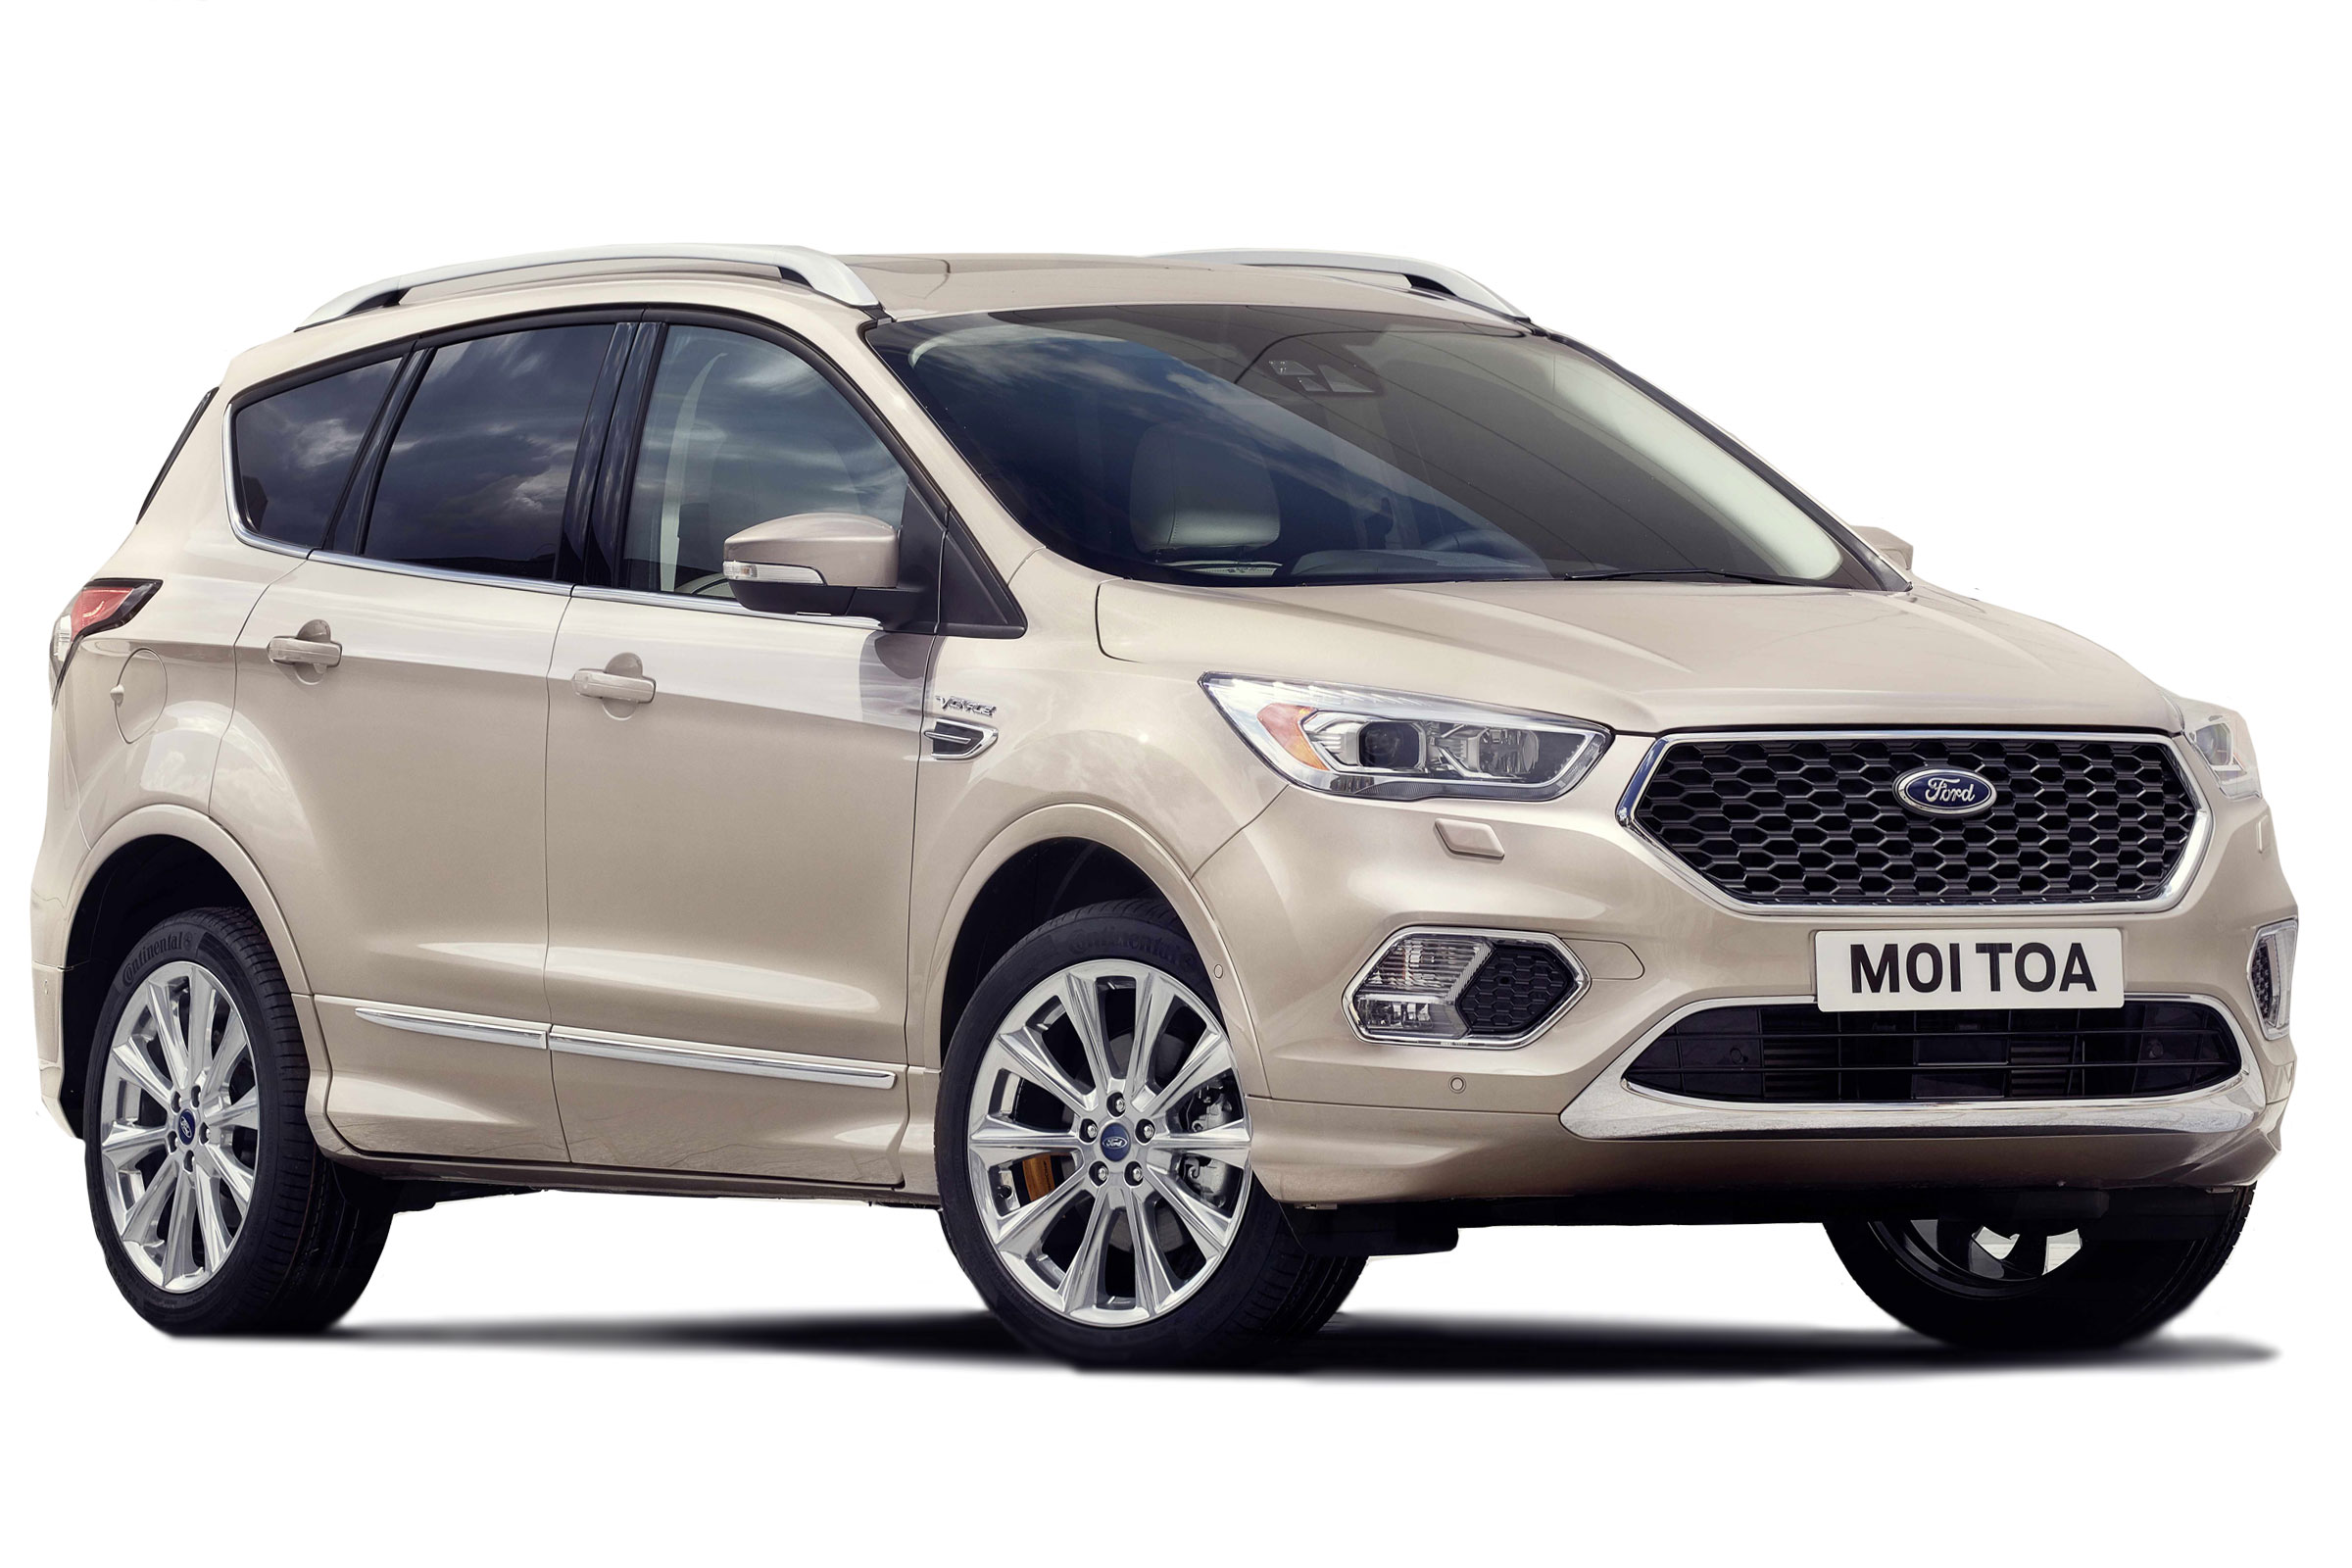 Used Ford Kuga review: 2012 to 2019 (Mk2) - Reliability and common